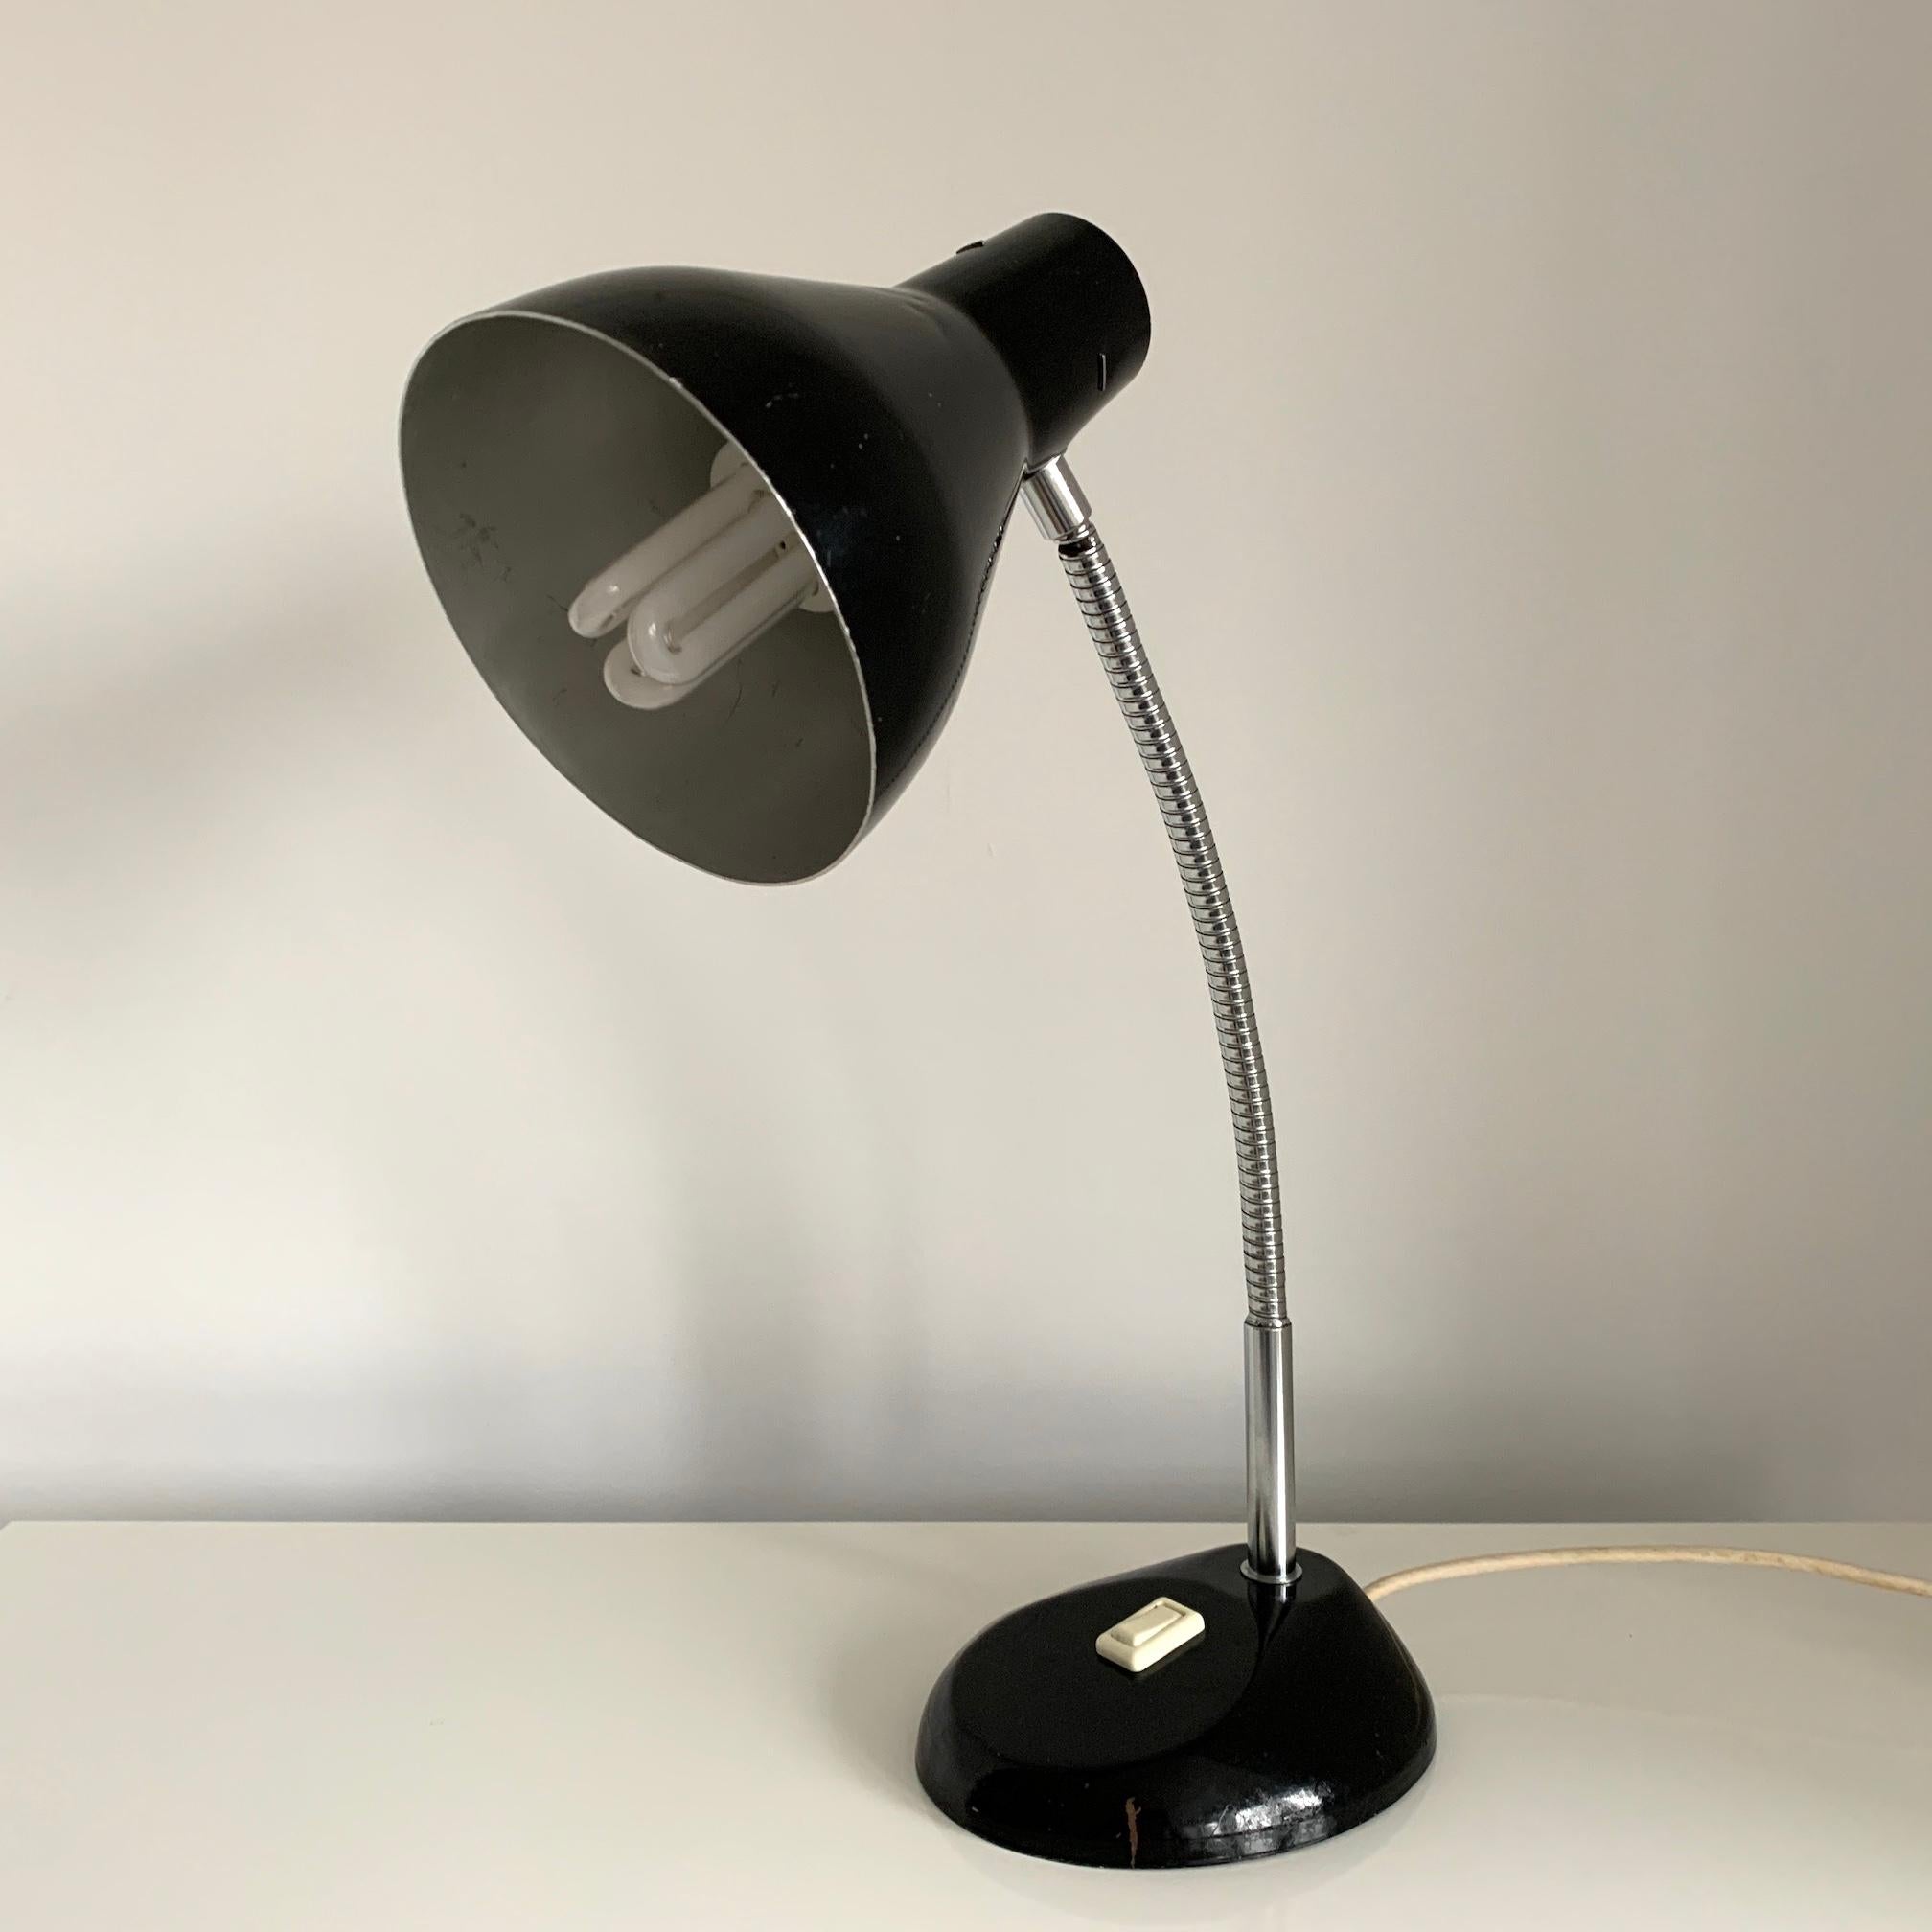 This Herbert Terry Desk Lamp features a sleek design with a flexible gooseneck, gloss black with base mounted switch, a timeless classic that is the perfect addition to any vintage or contemporary interior.

In good vintage condition, with minor